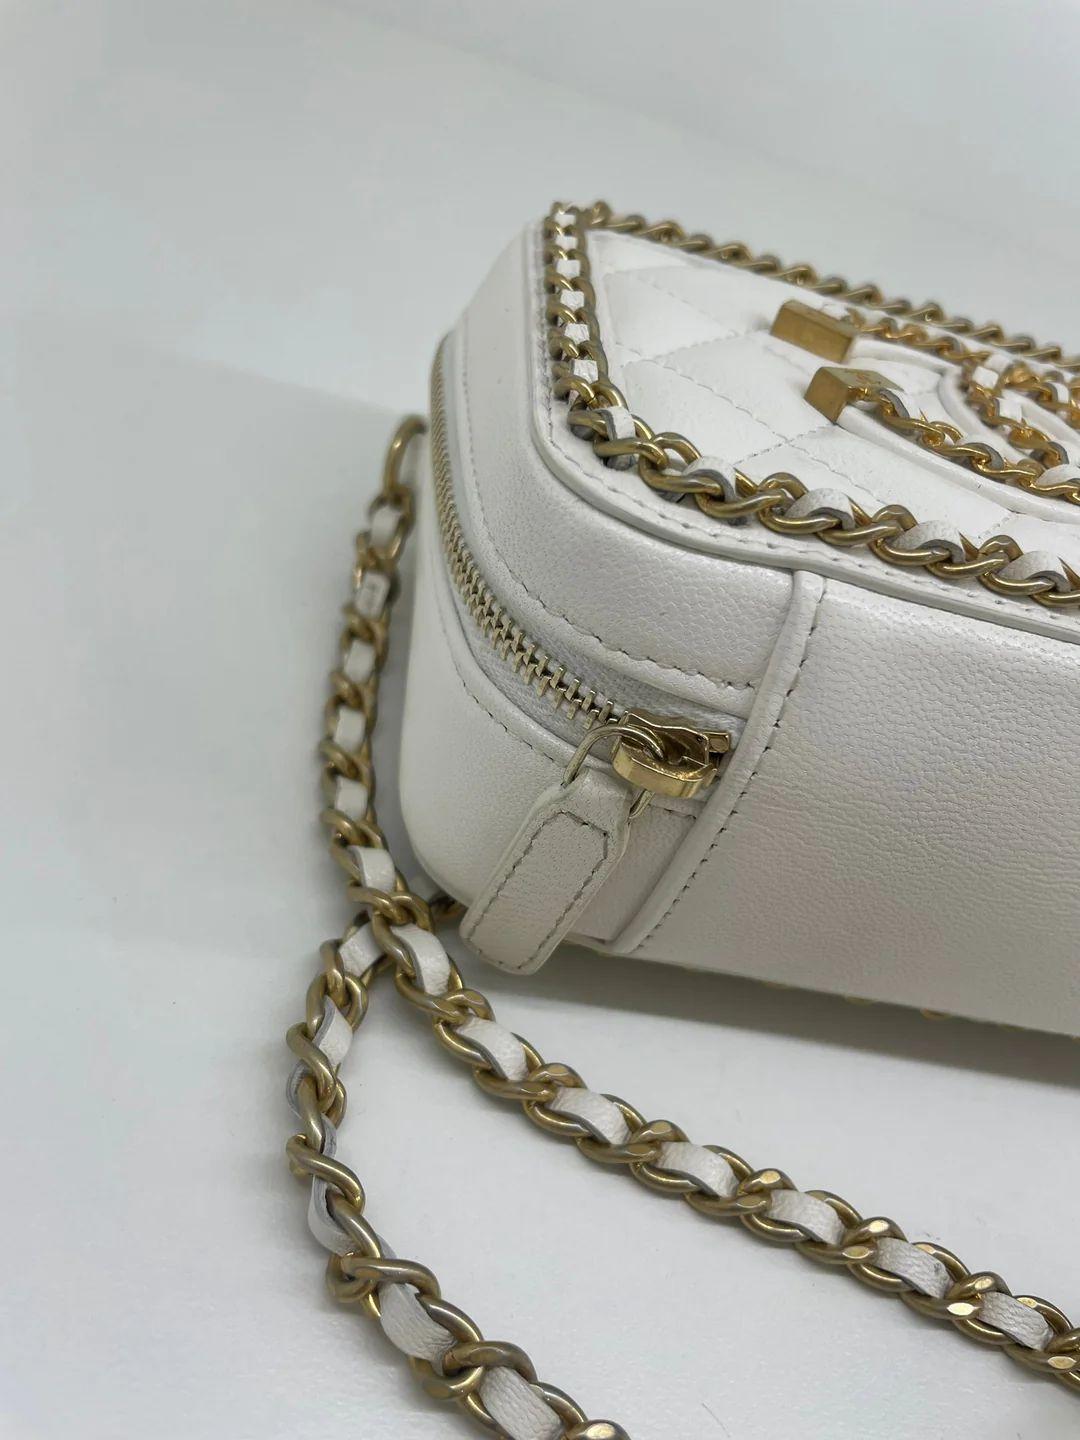 Chanel White Vanity Small - Chain Detail In Good Condition For Sale In Double Bay, AU